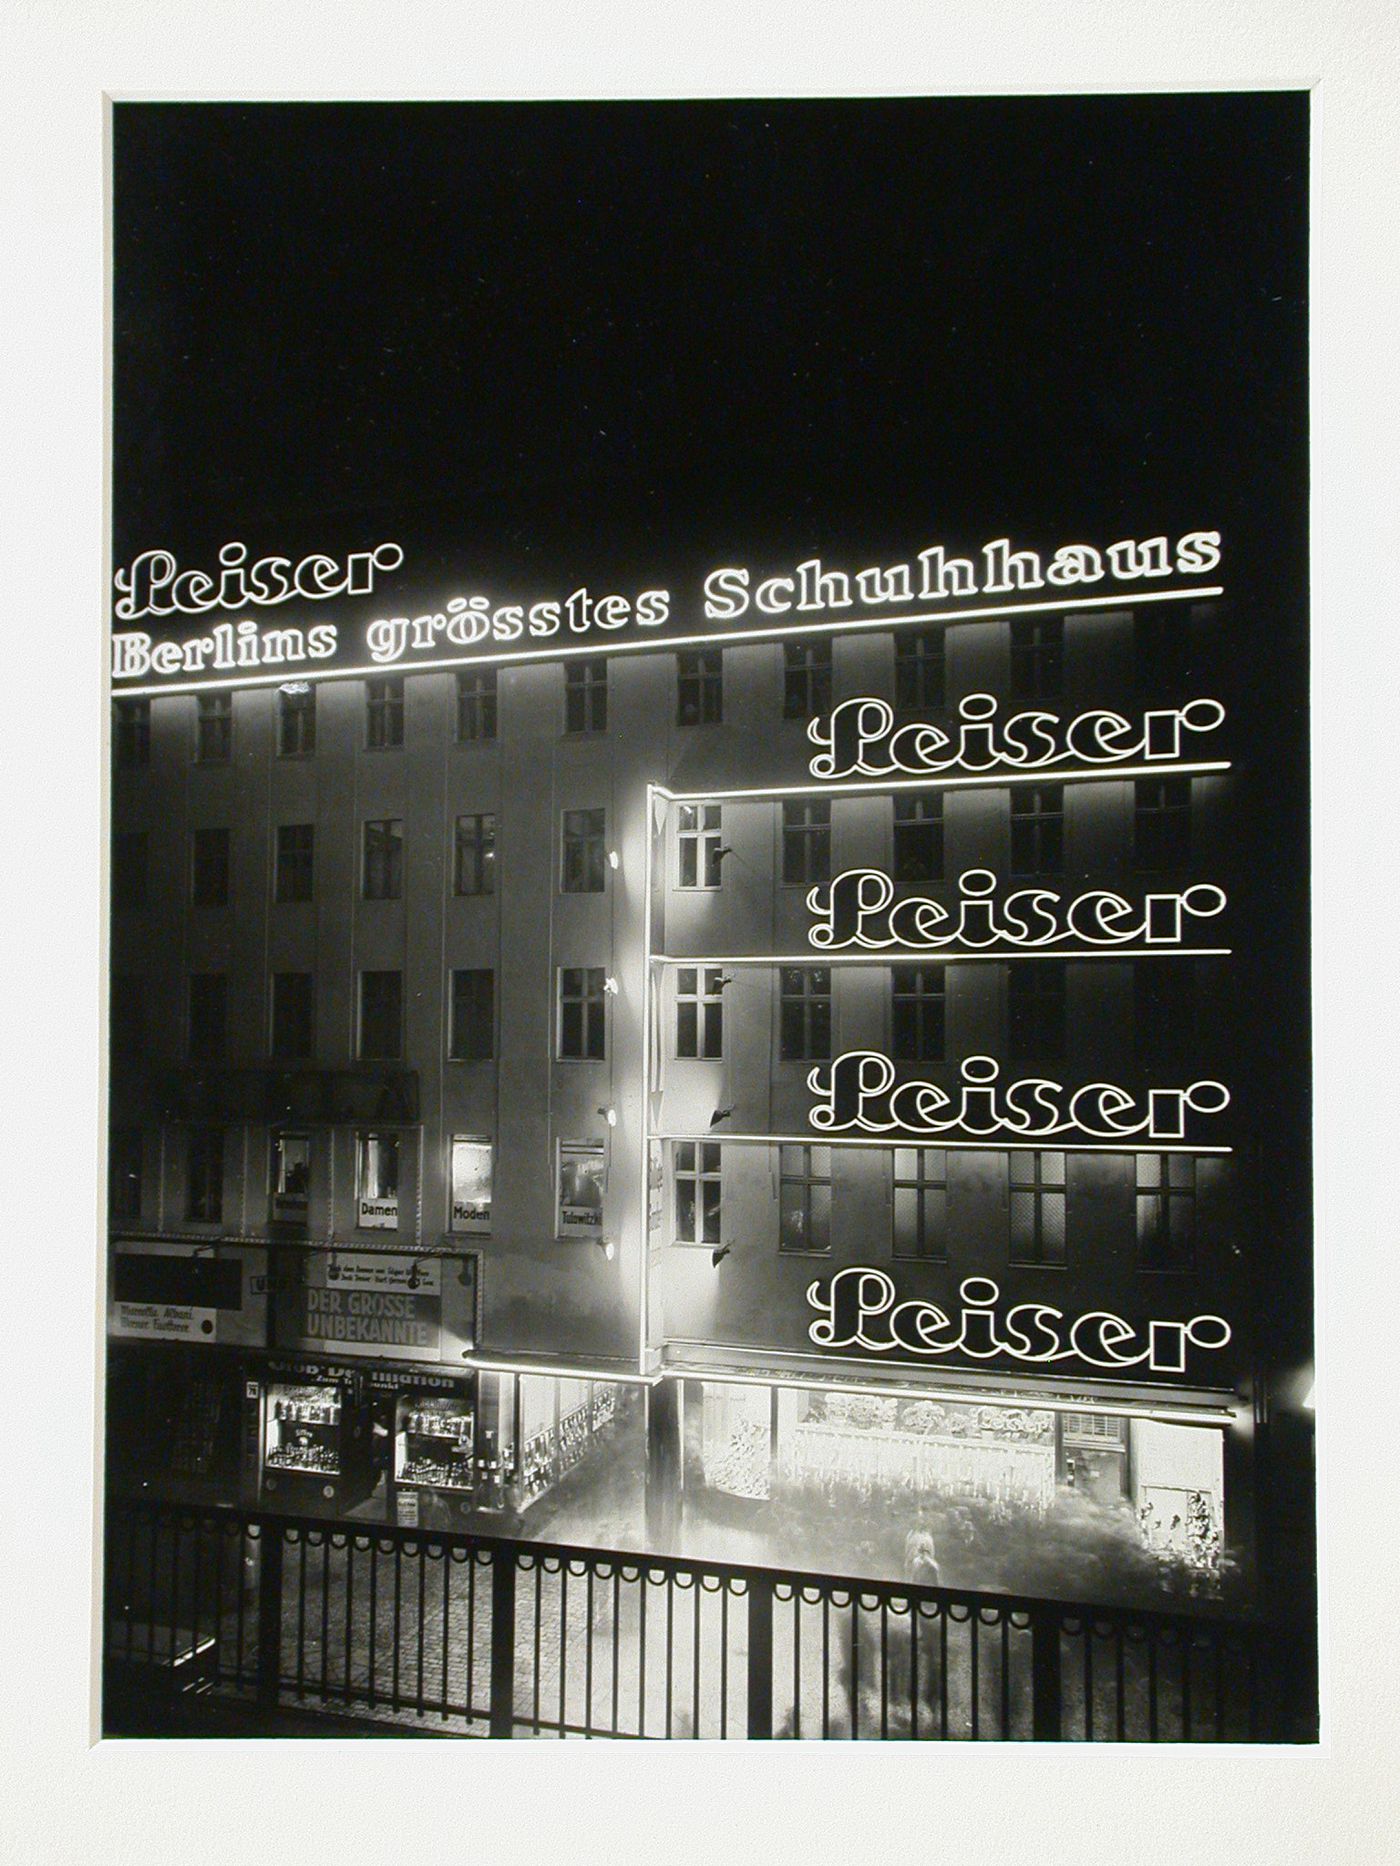 Night view of Leiser shoe store and its advertising signs, Berlin, Germany